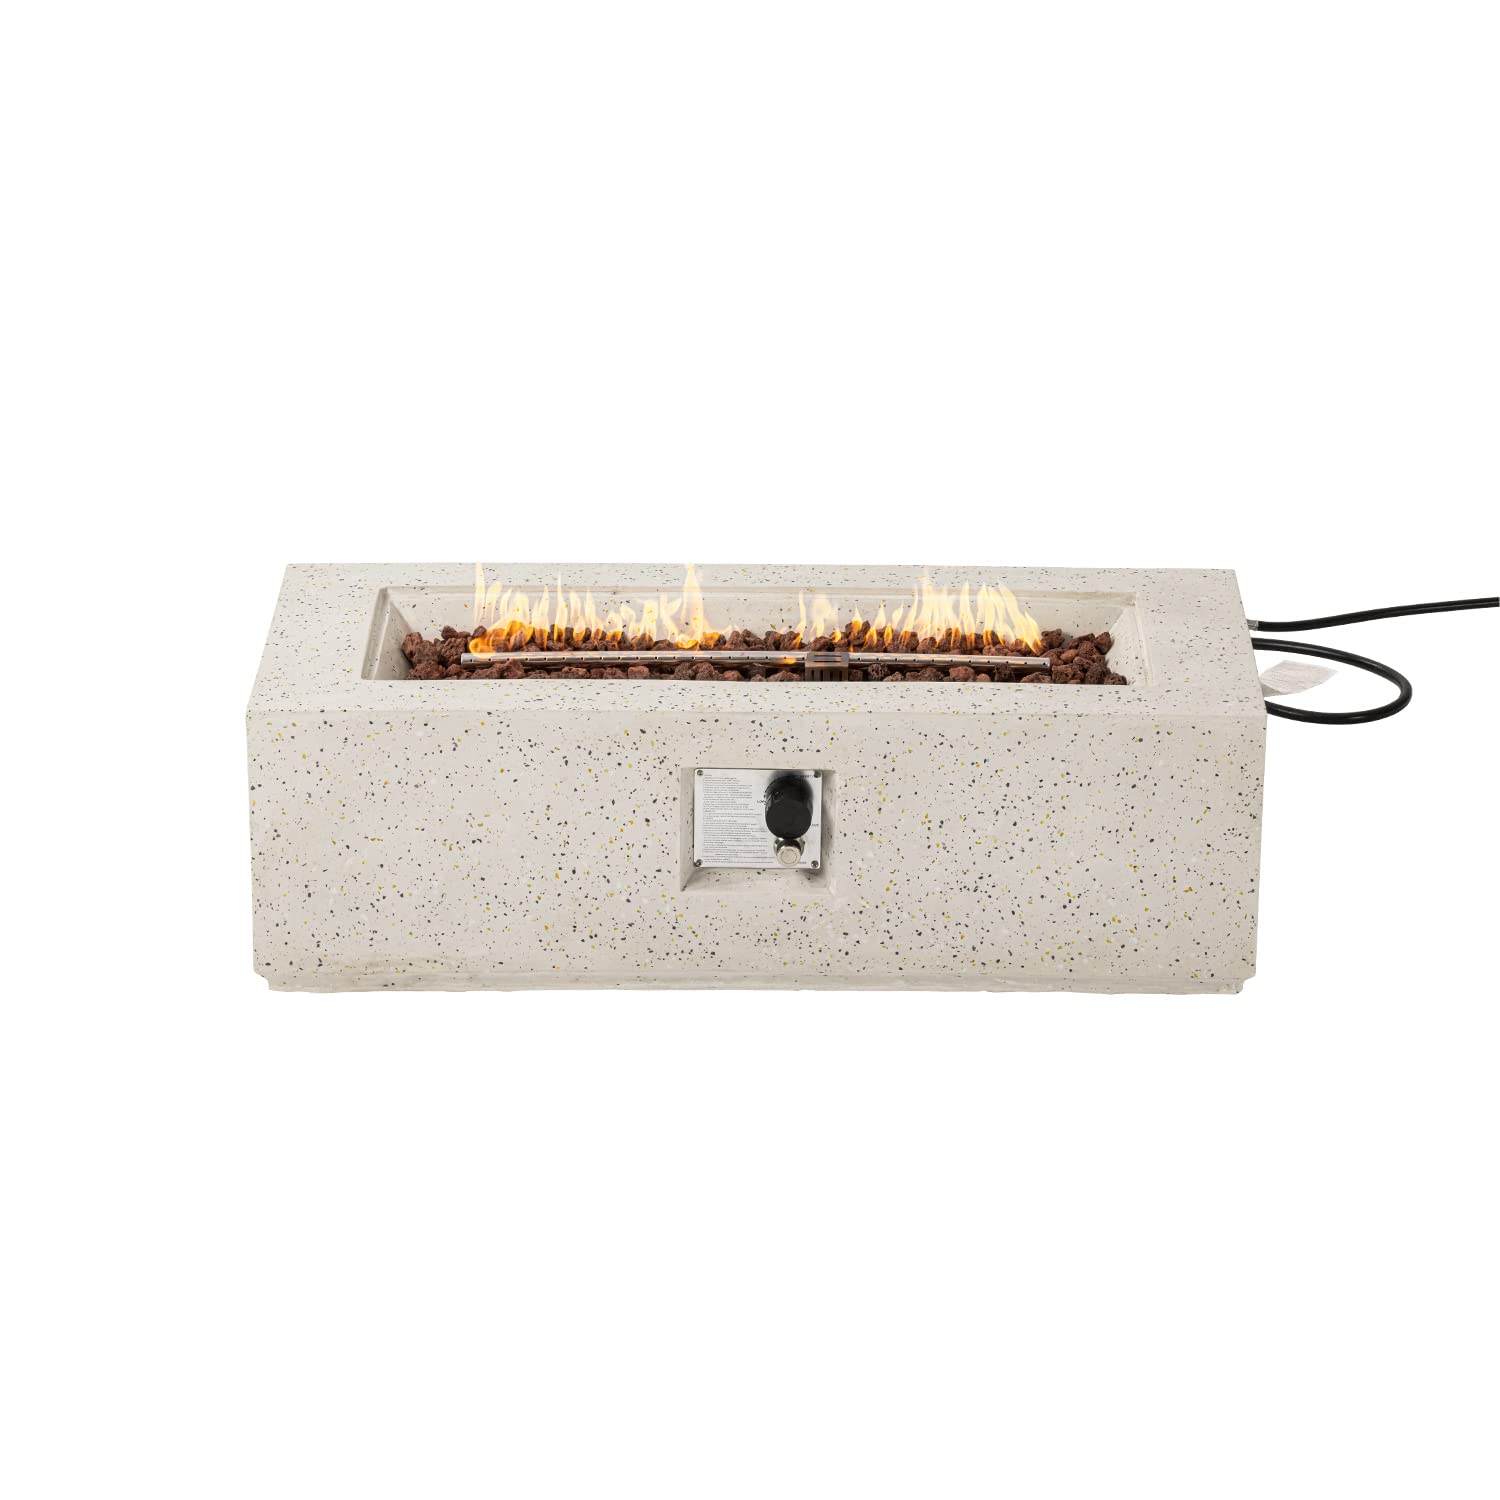 COSIEST Outdoor Propane Fire Pit Coffee Table, 42-inch x 13-inch Terrazzo Rectangle Base Patio Heater w 50,000 BTU Stainless Steel Burner, Free Lava Rocks and Rain Cover